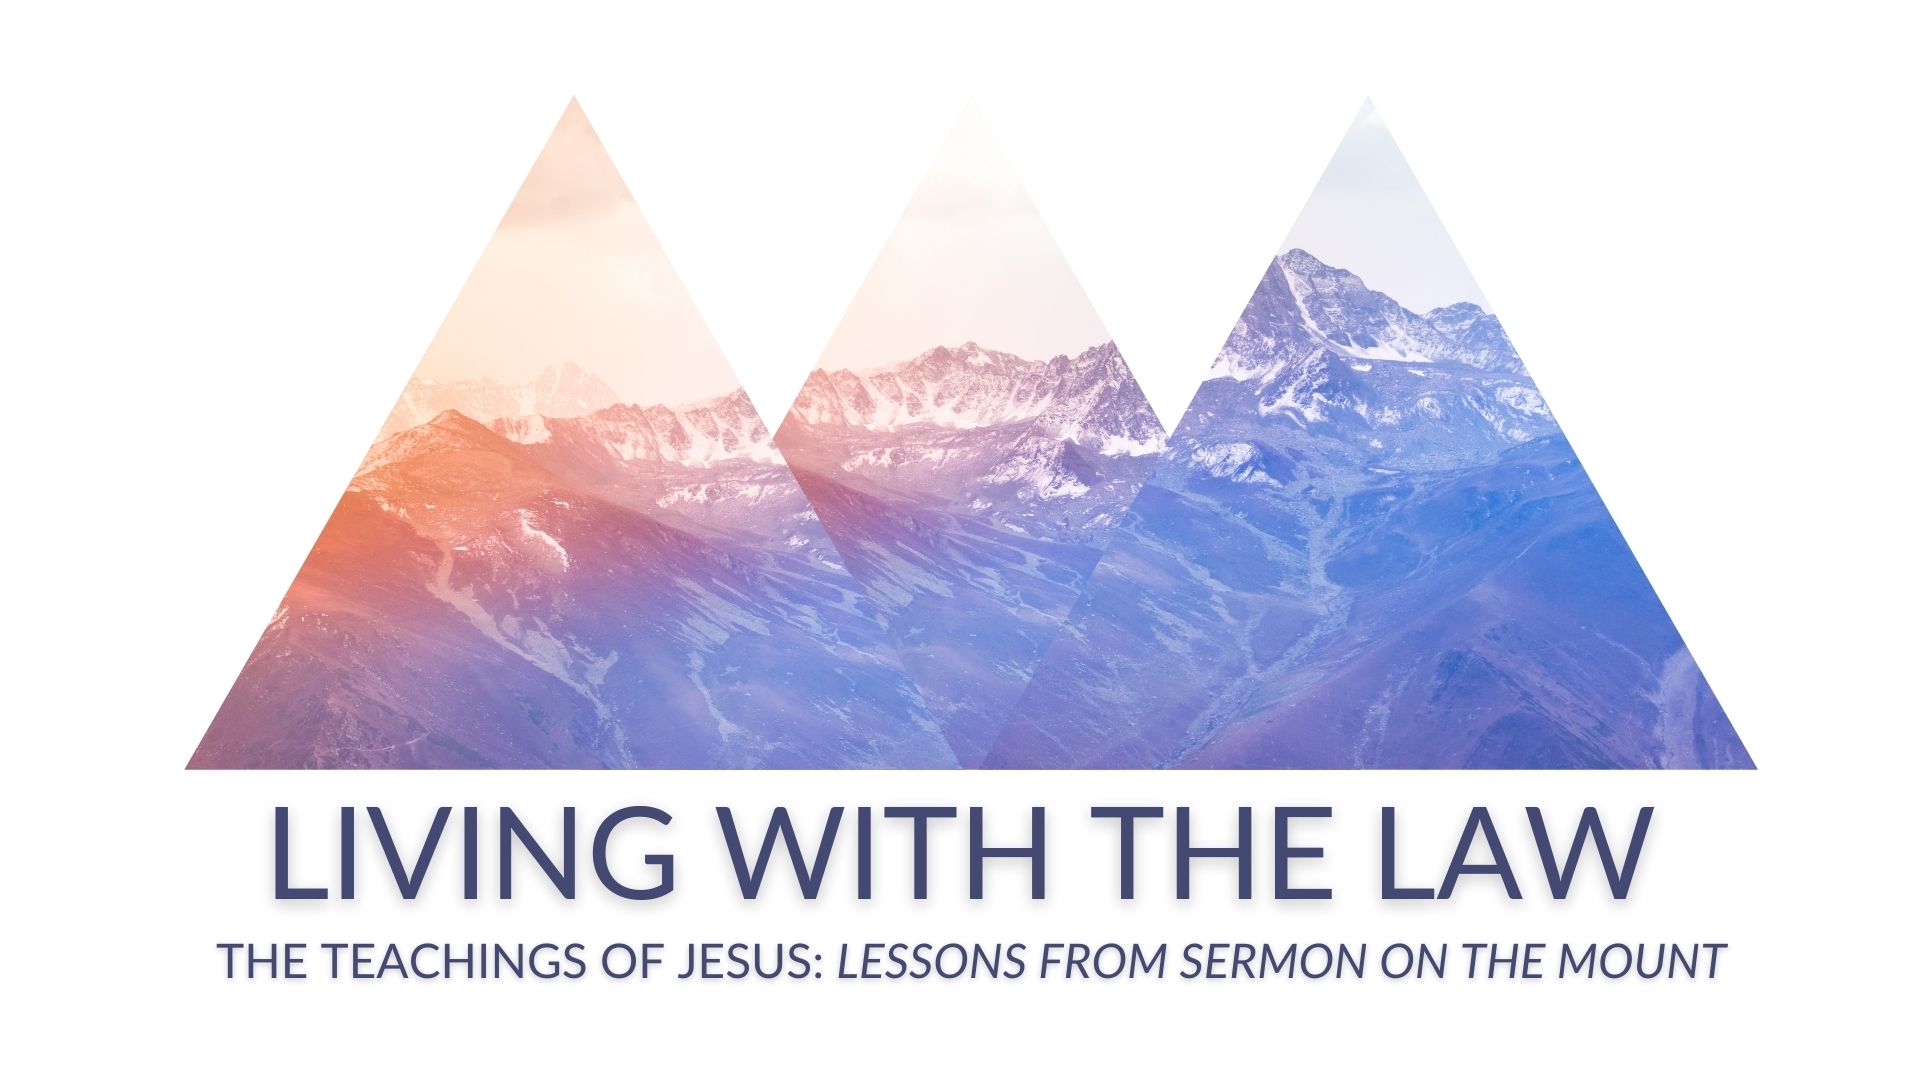 LIVING WITH THE LAW - The Teachings of Jesus: Lessons from the Sermon on the Mount